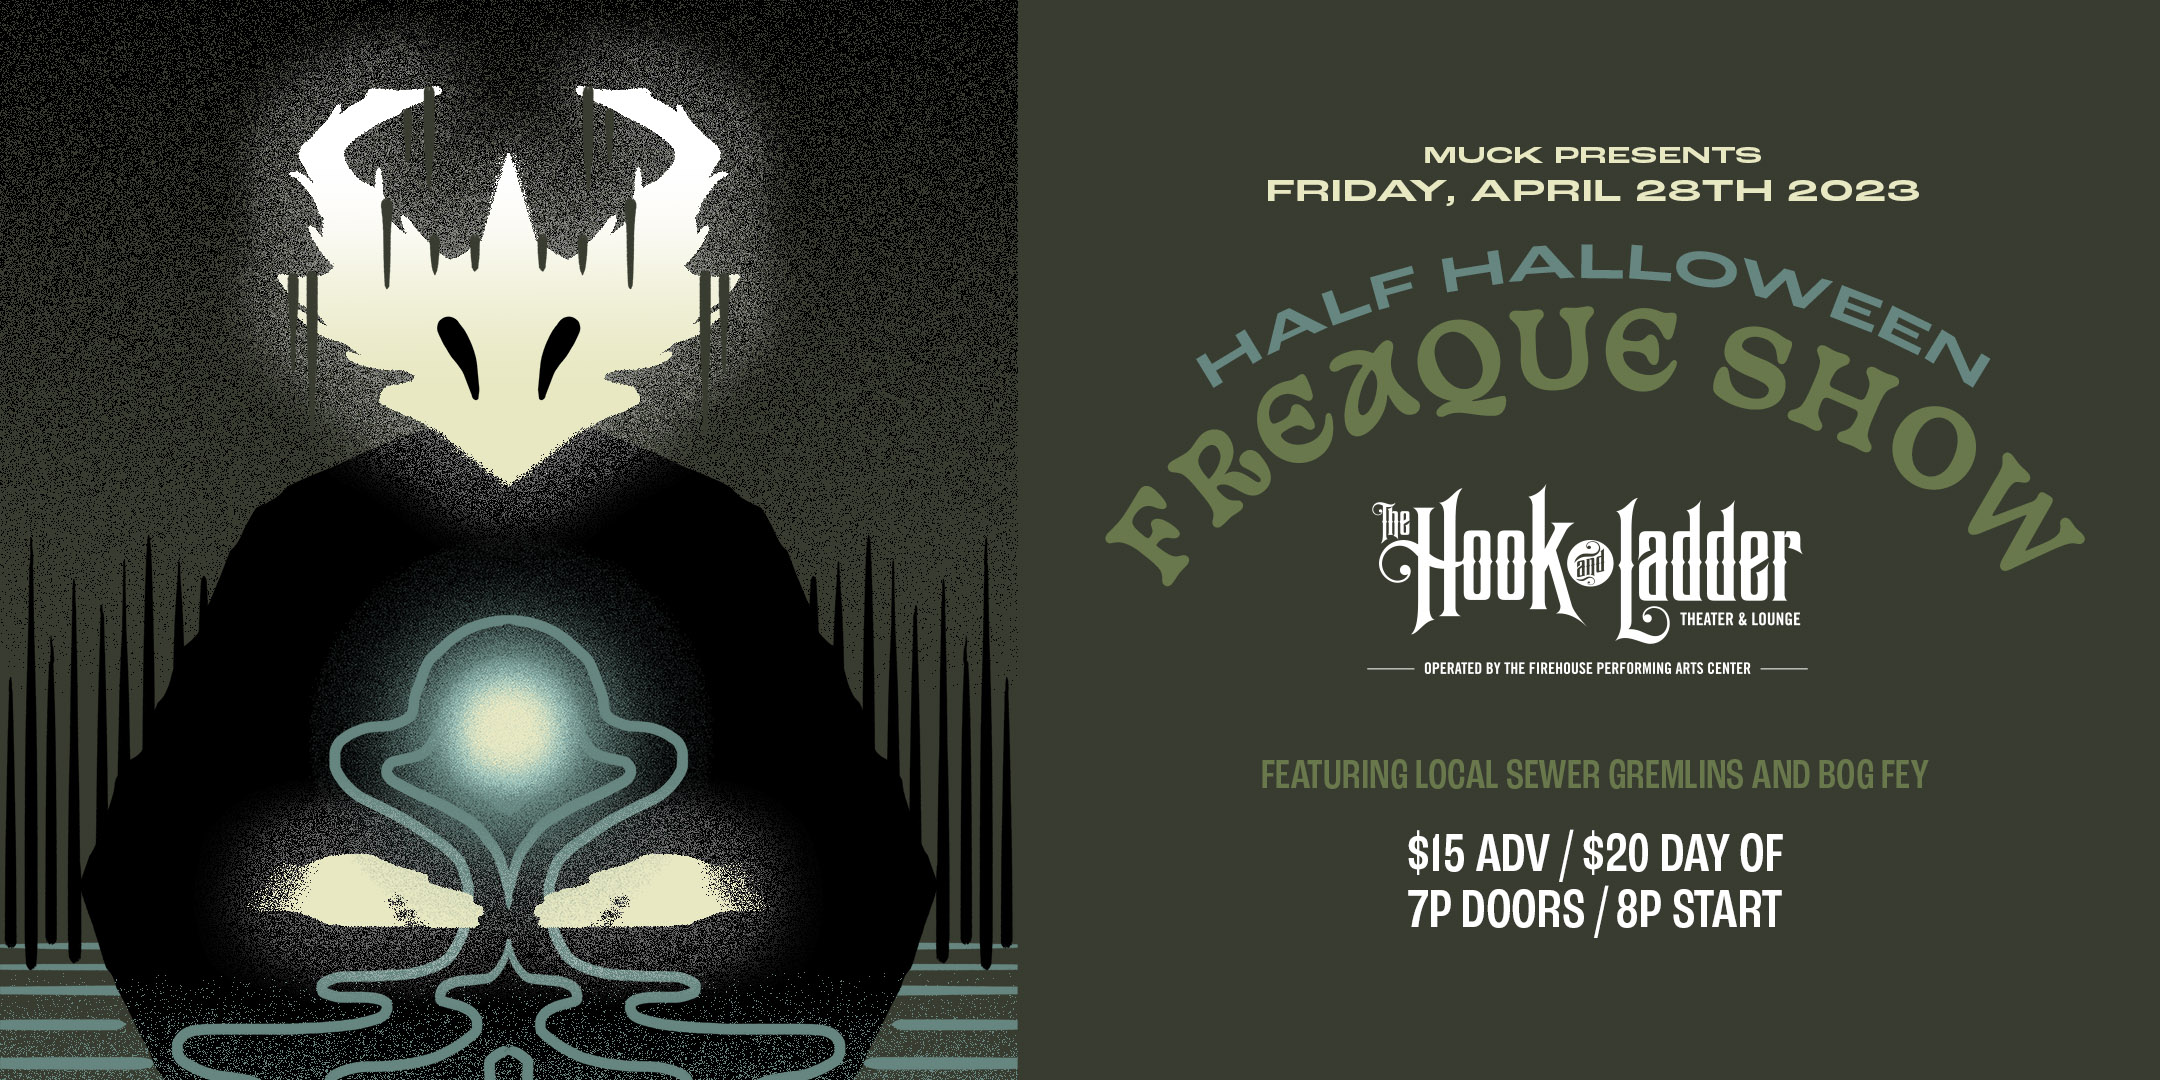 Muck Presents: Half Halloween Freaque Show featuring local Sewer Gremlins and Bog Fey. Friday April 28 The Mission Room at The Hook and Ladder Theater Doors 7:00pm :: Music 8:00pm :: 21+ $15 ADV/ $20 DOS NO REFUNDS